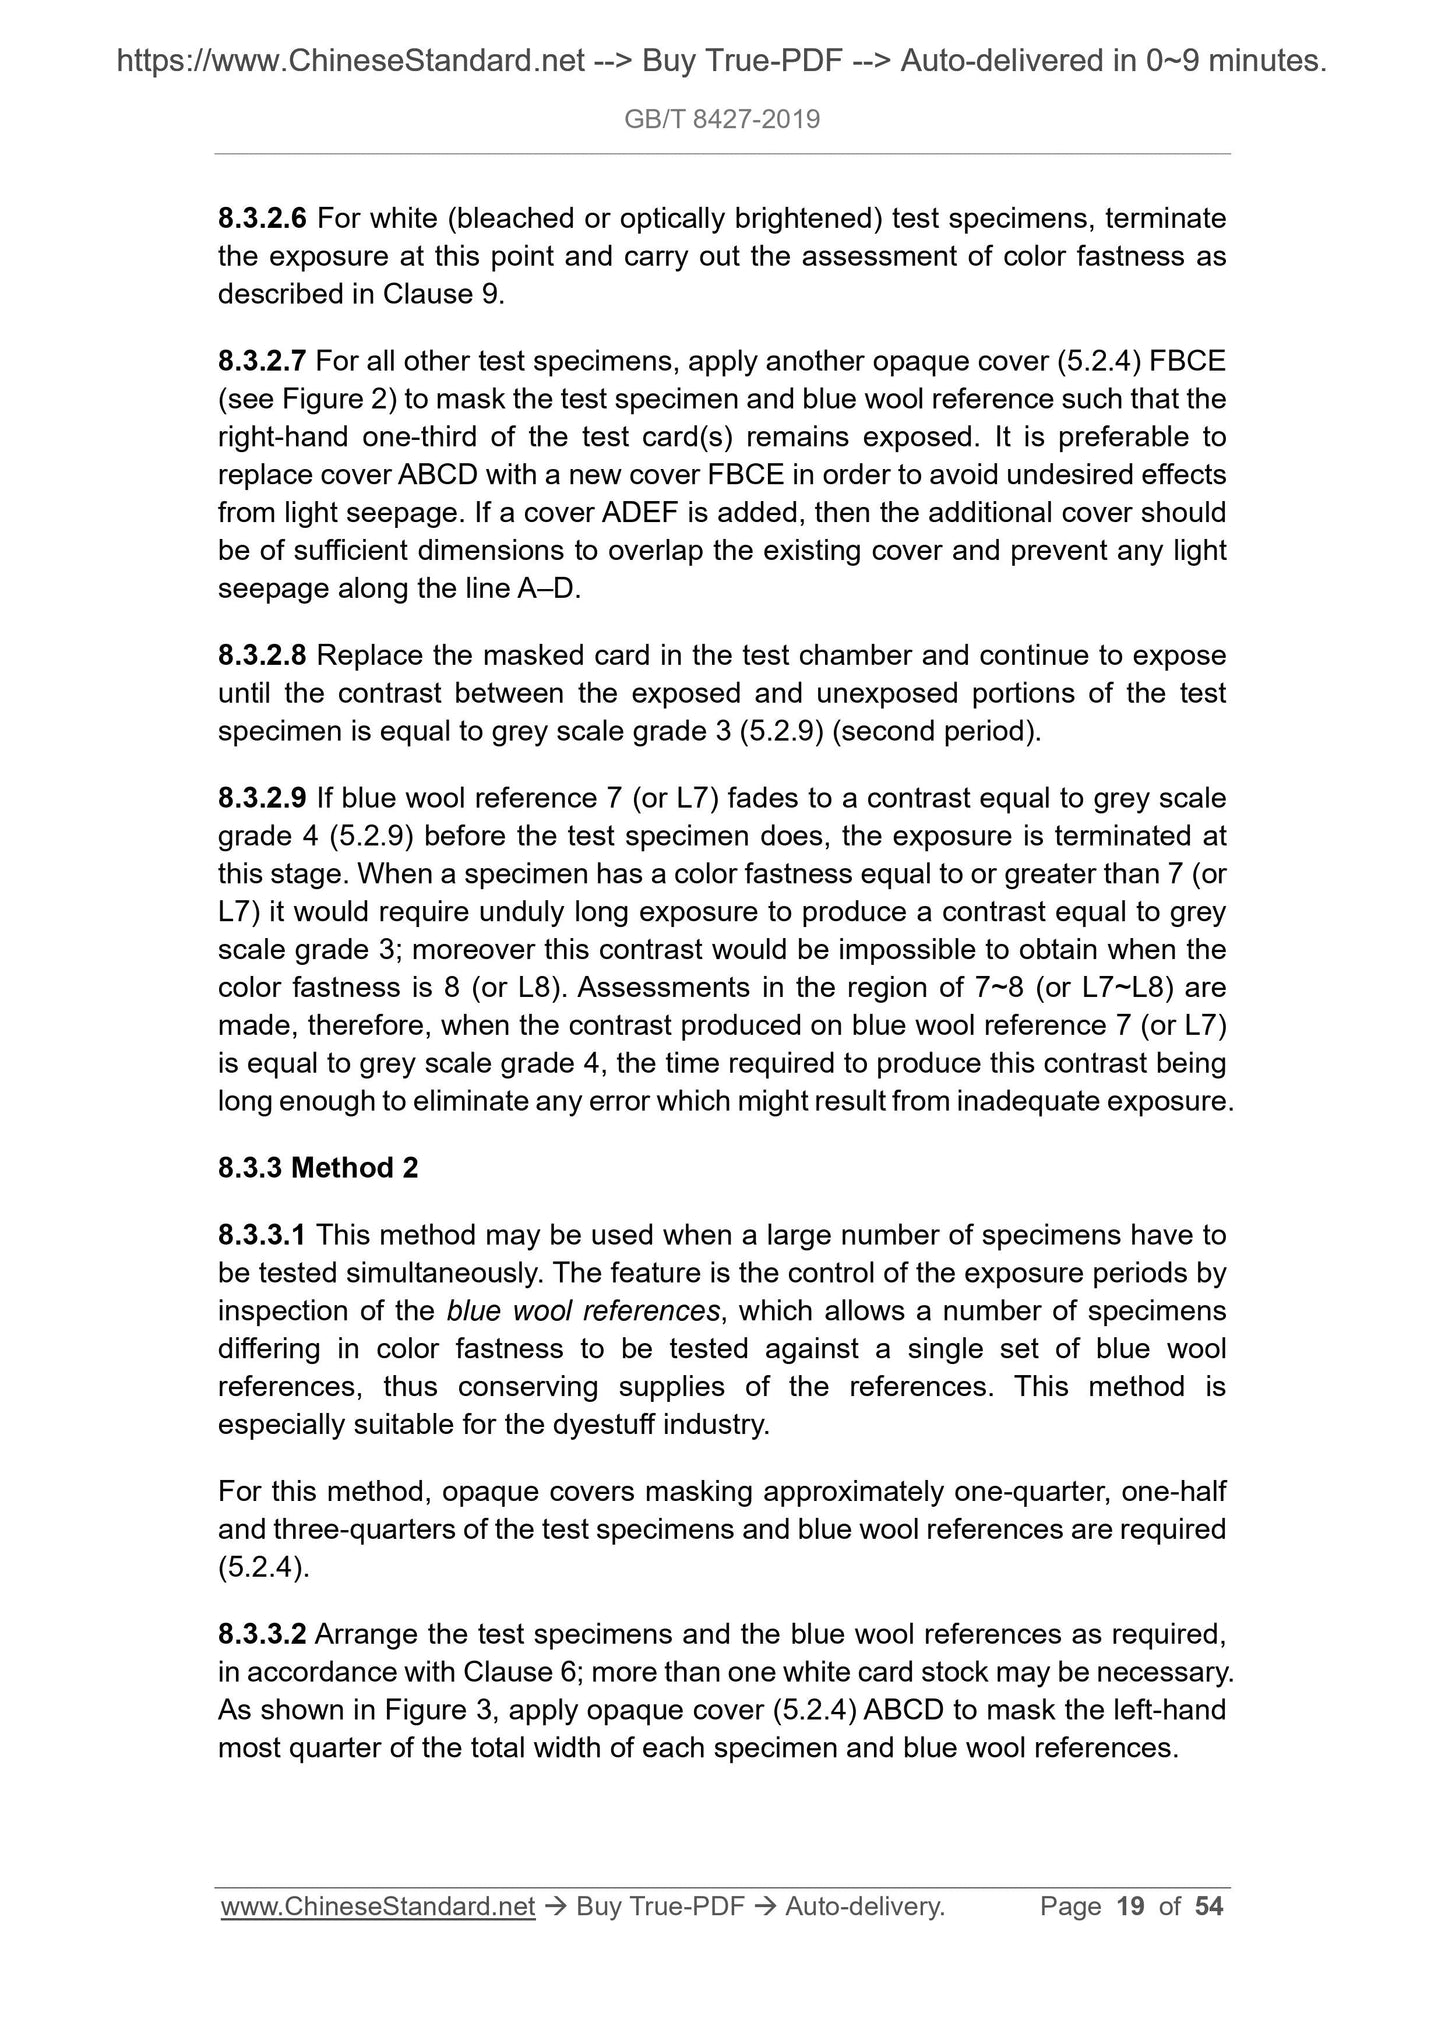 GB/T 8427-2019 Page 7